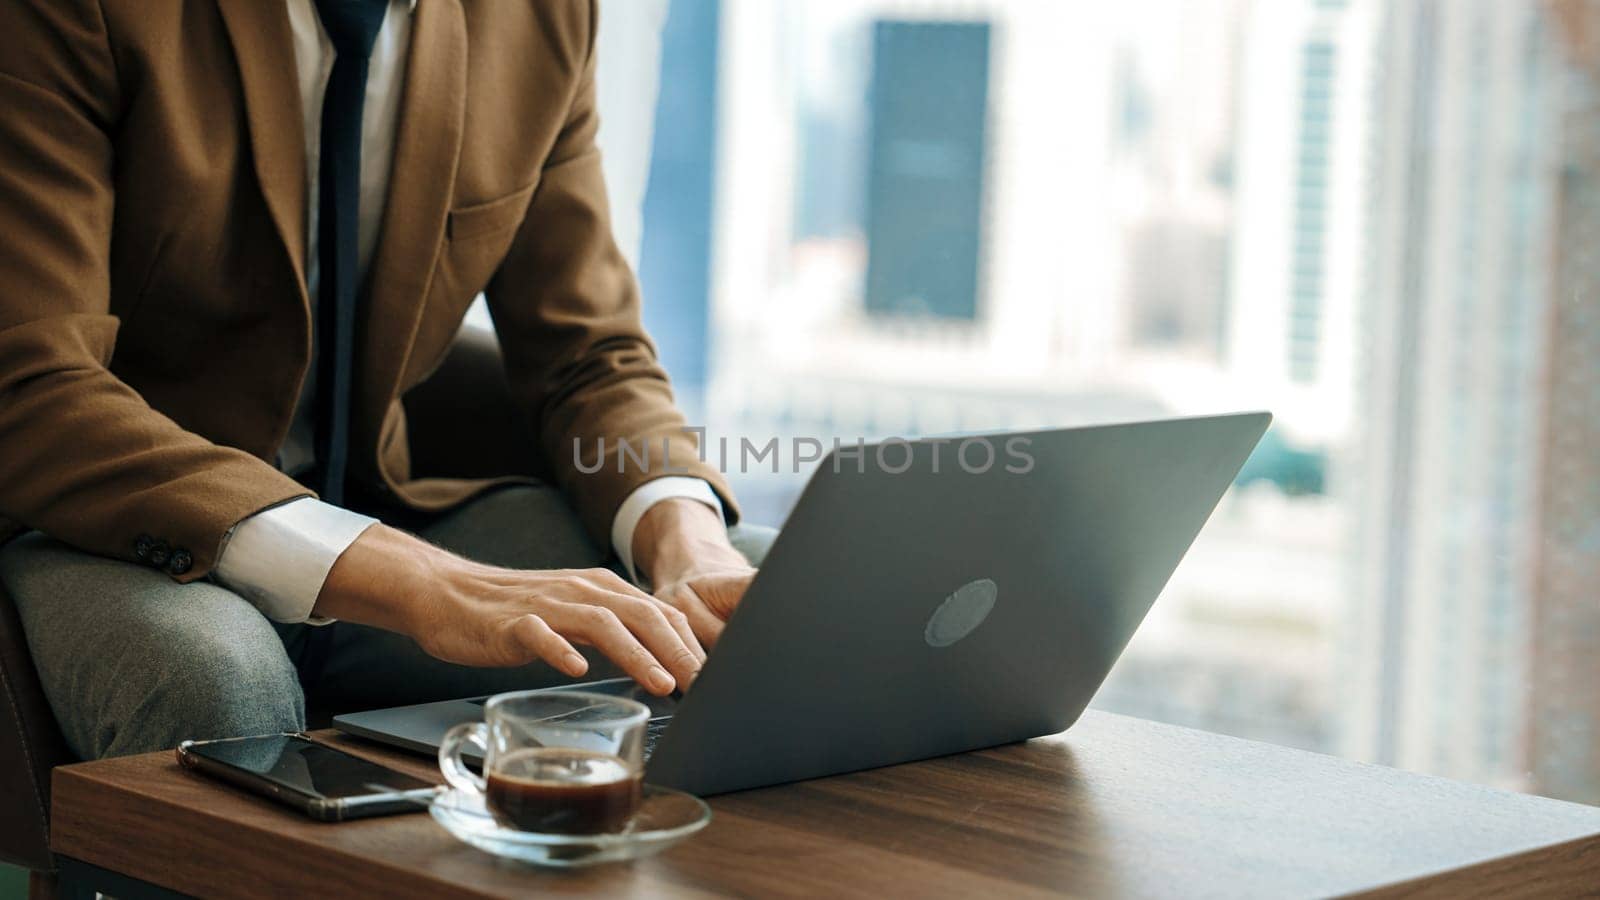 Businessman sitting on furniture working on laptop at ornamented corporate waiting area with cityscape background on the window. Business profession and strategic marketing plan for business success.